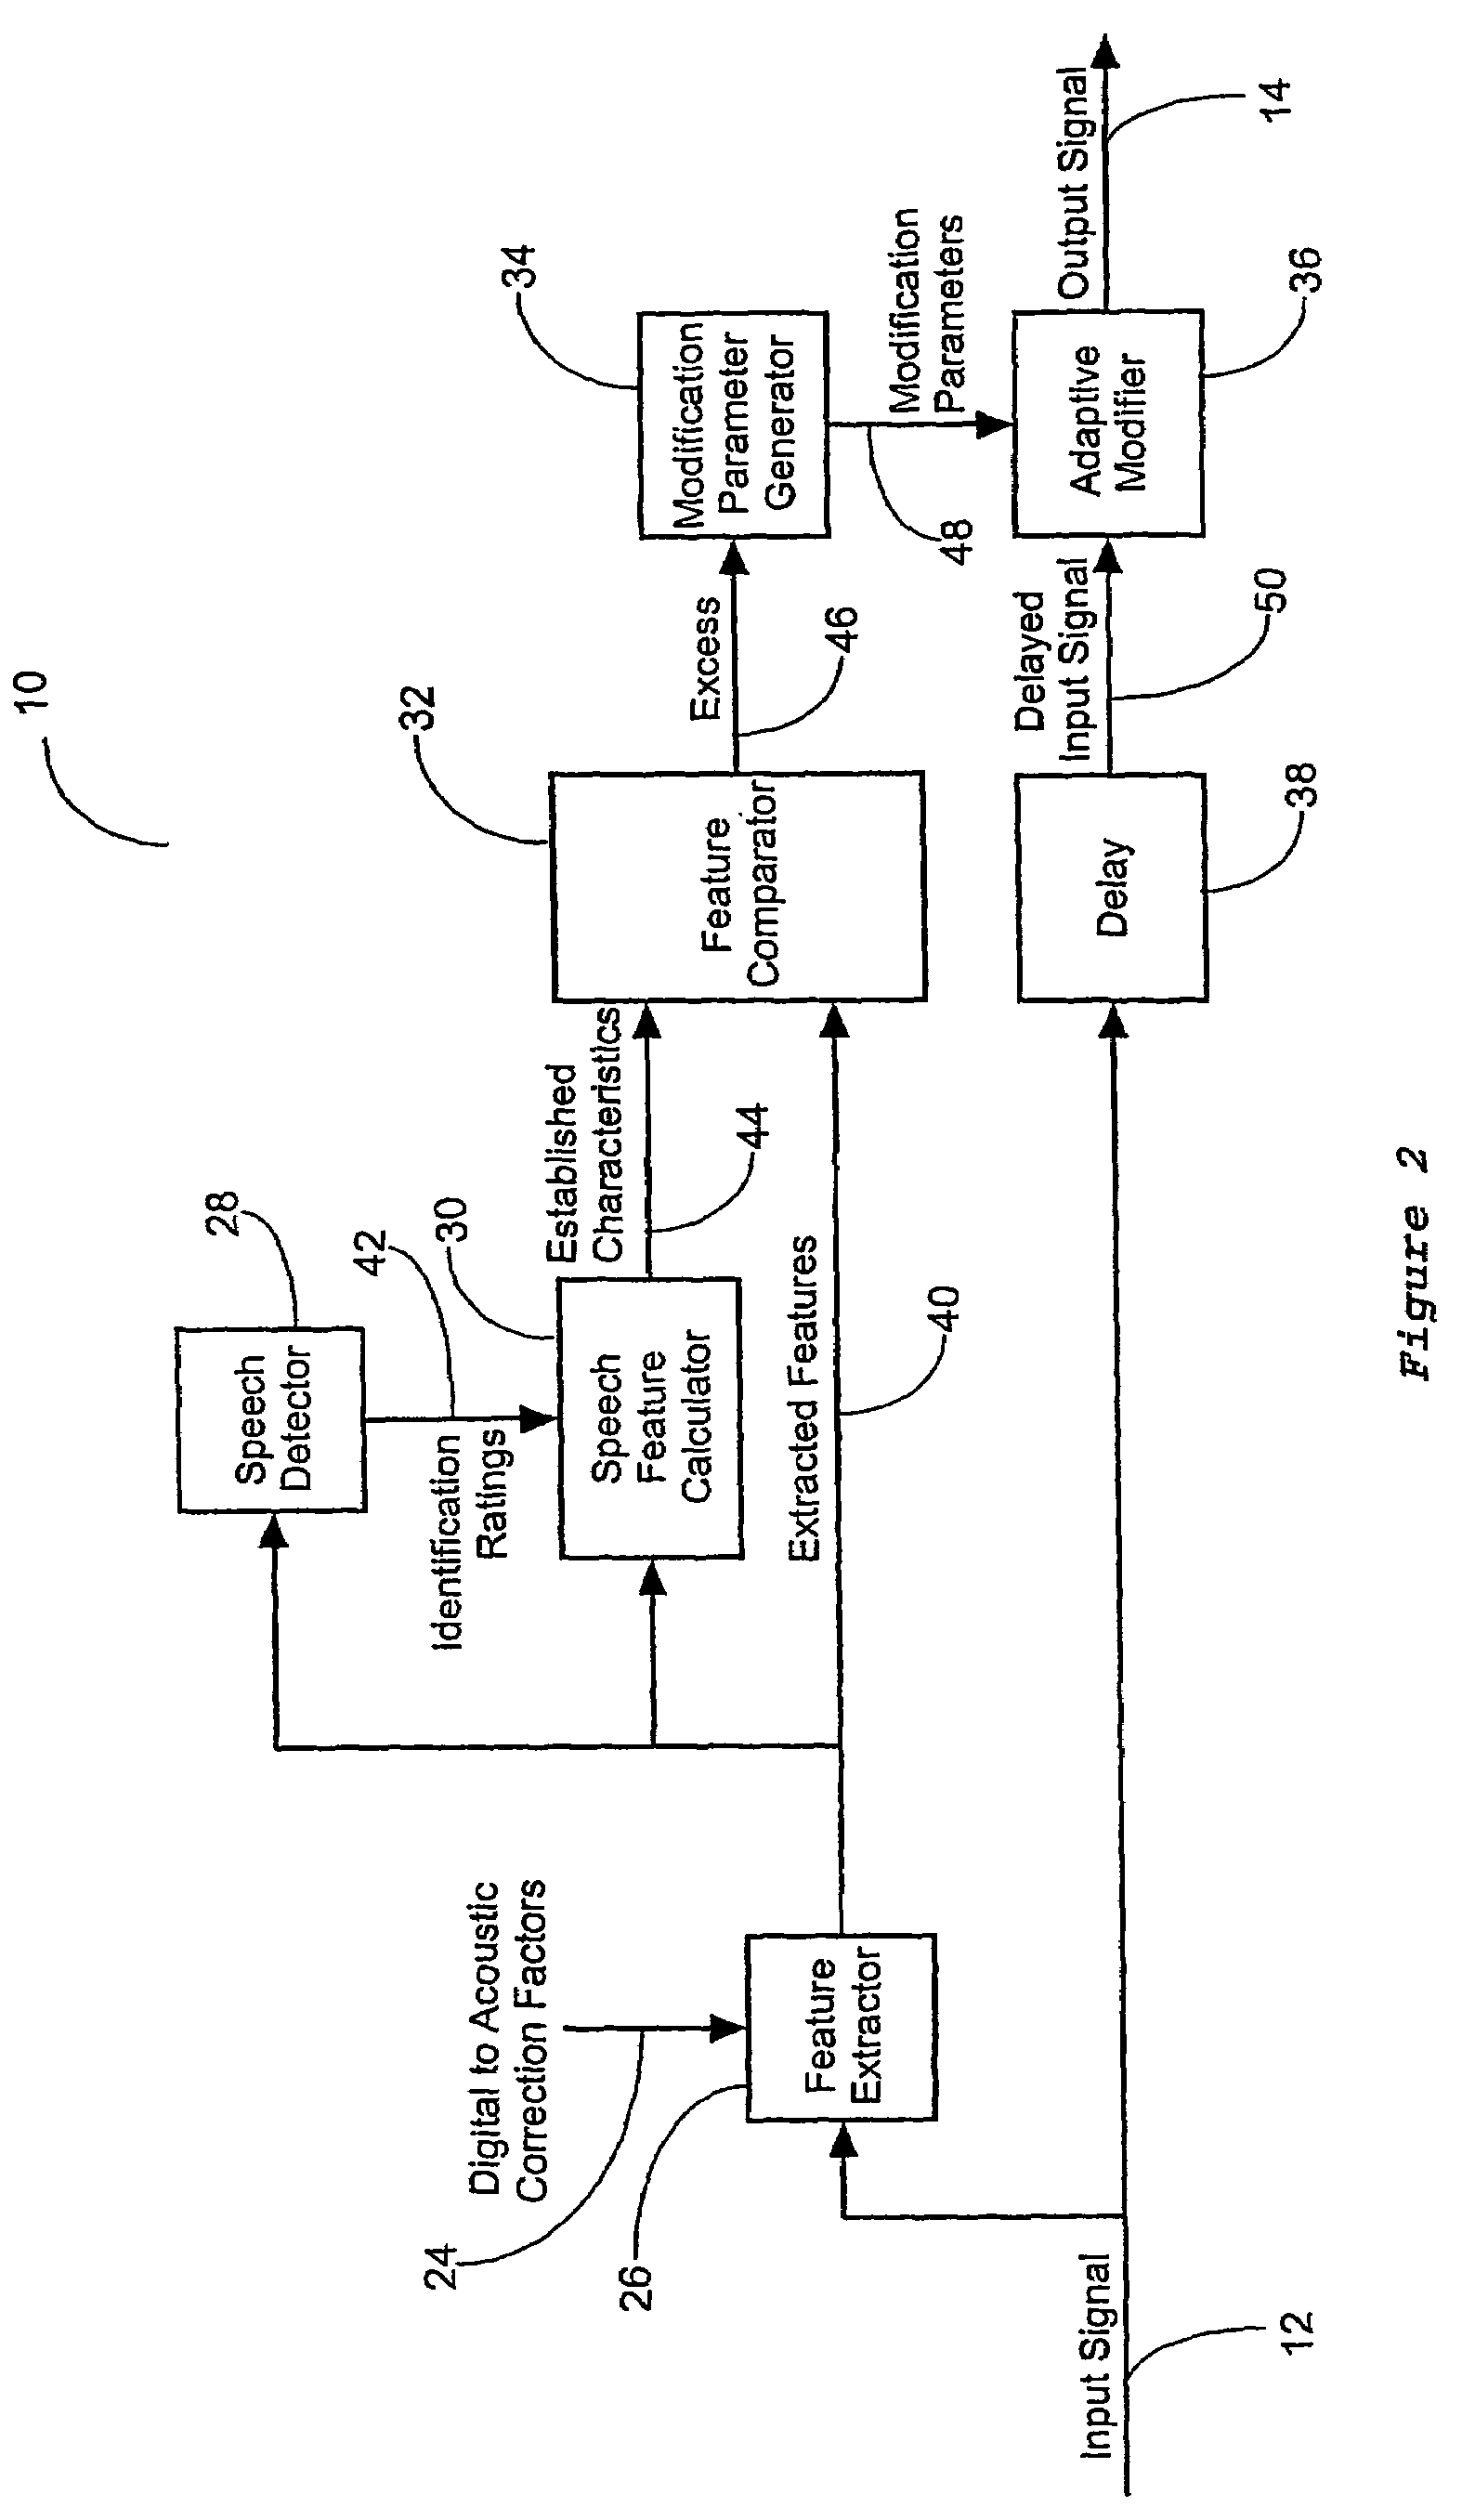 Method and system for controlling potentially harmful signals in a signal arranged to convey speech